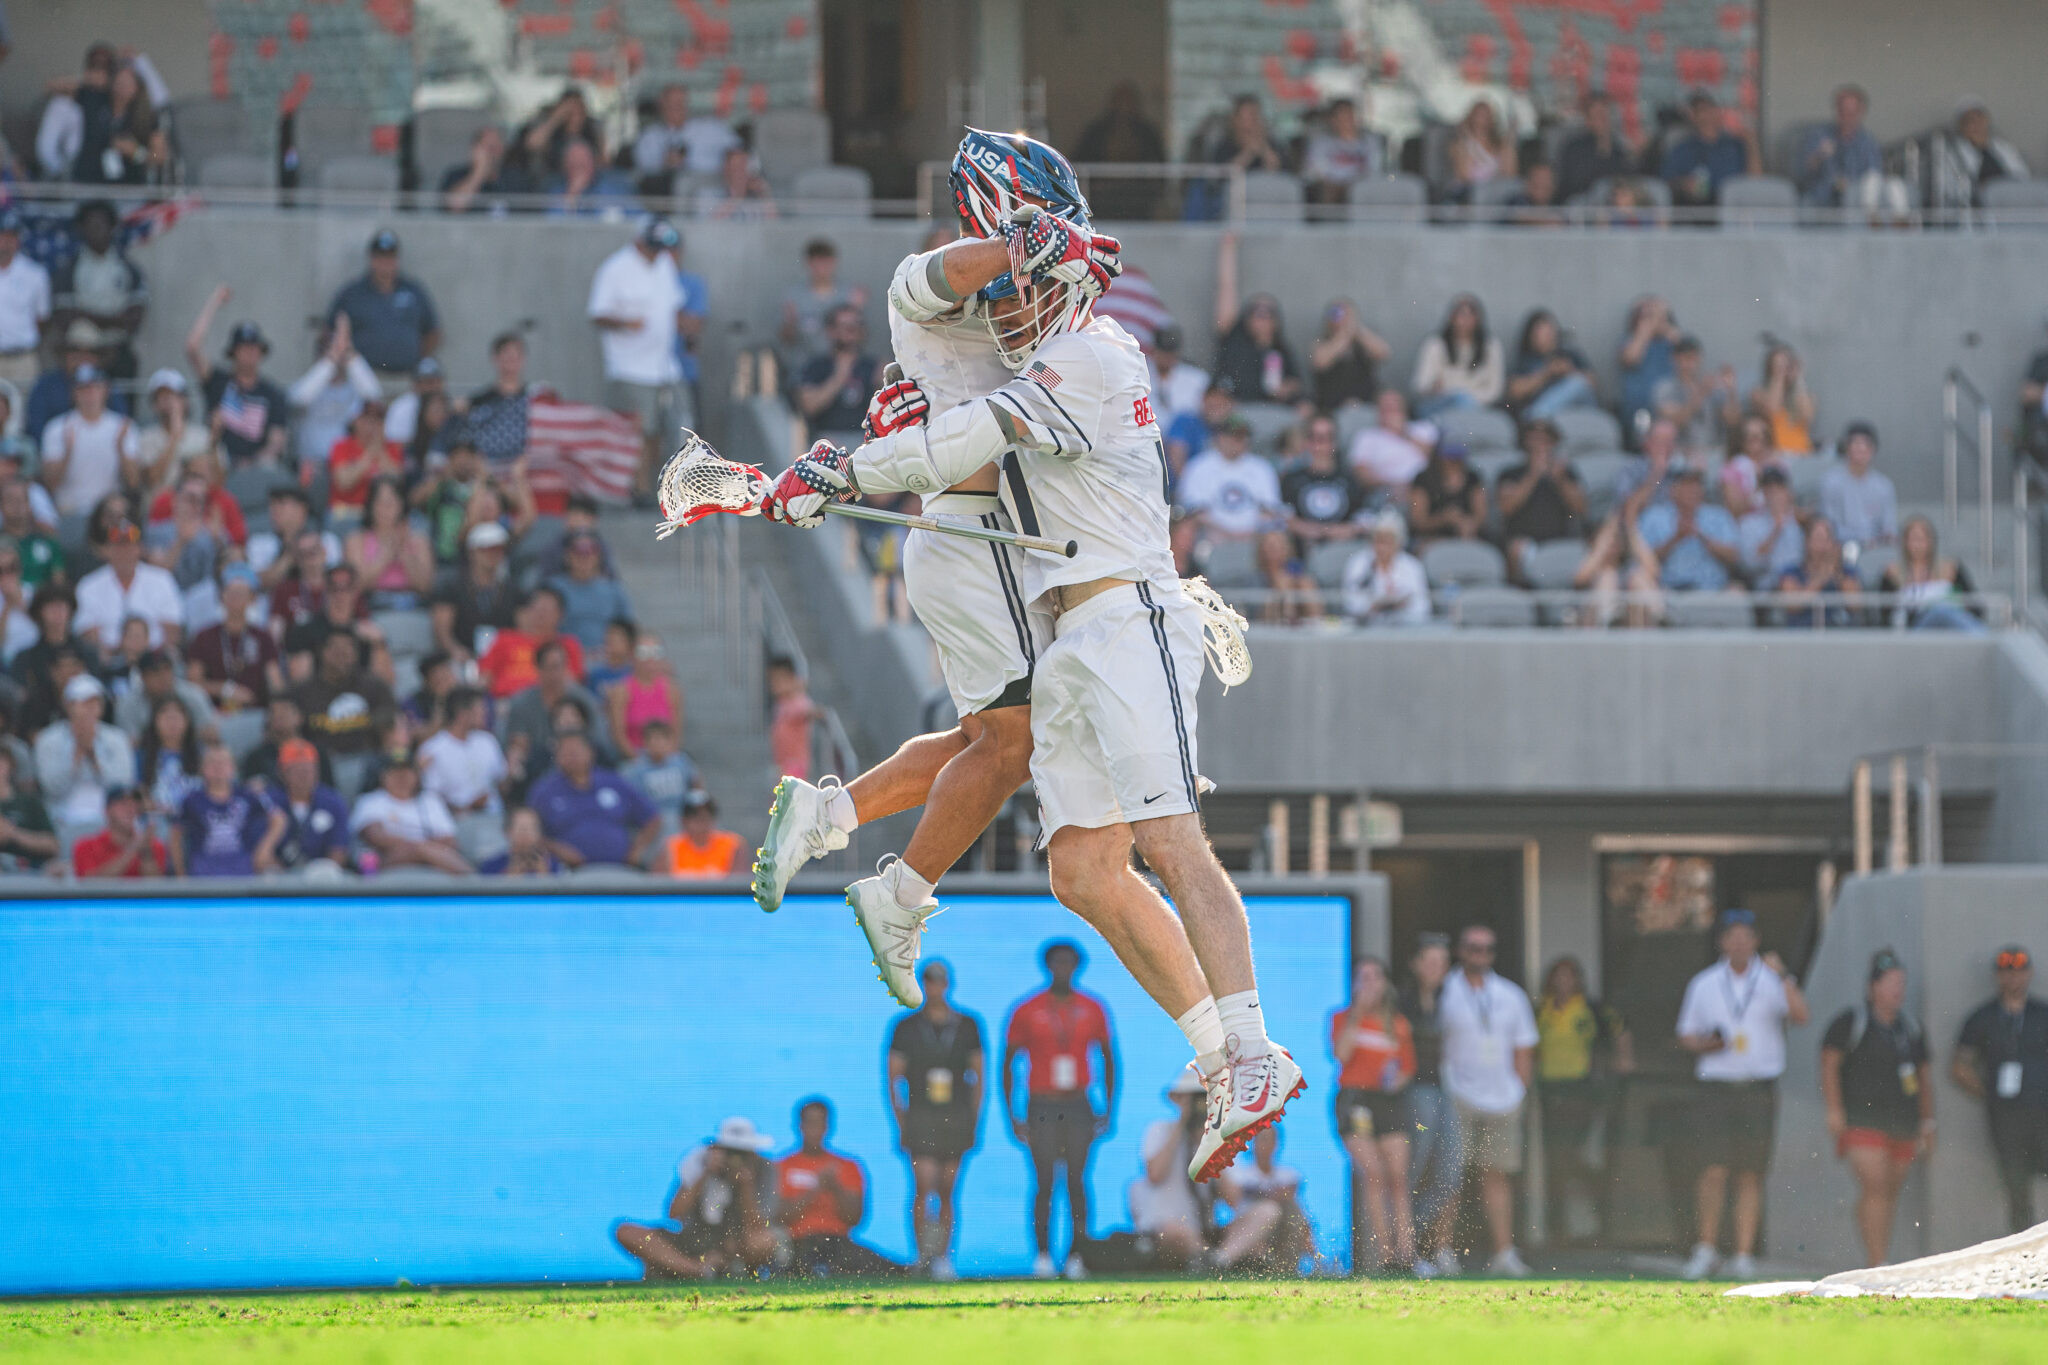  The United States won their 11th World Lacrosse Men's Championship title by defeating Canada 10-7 in the final ©World Lacrosse